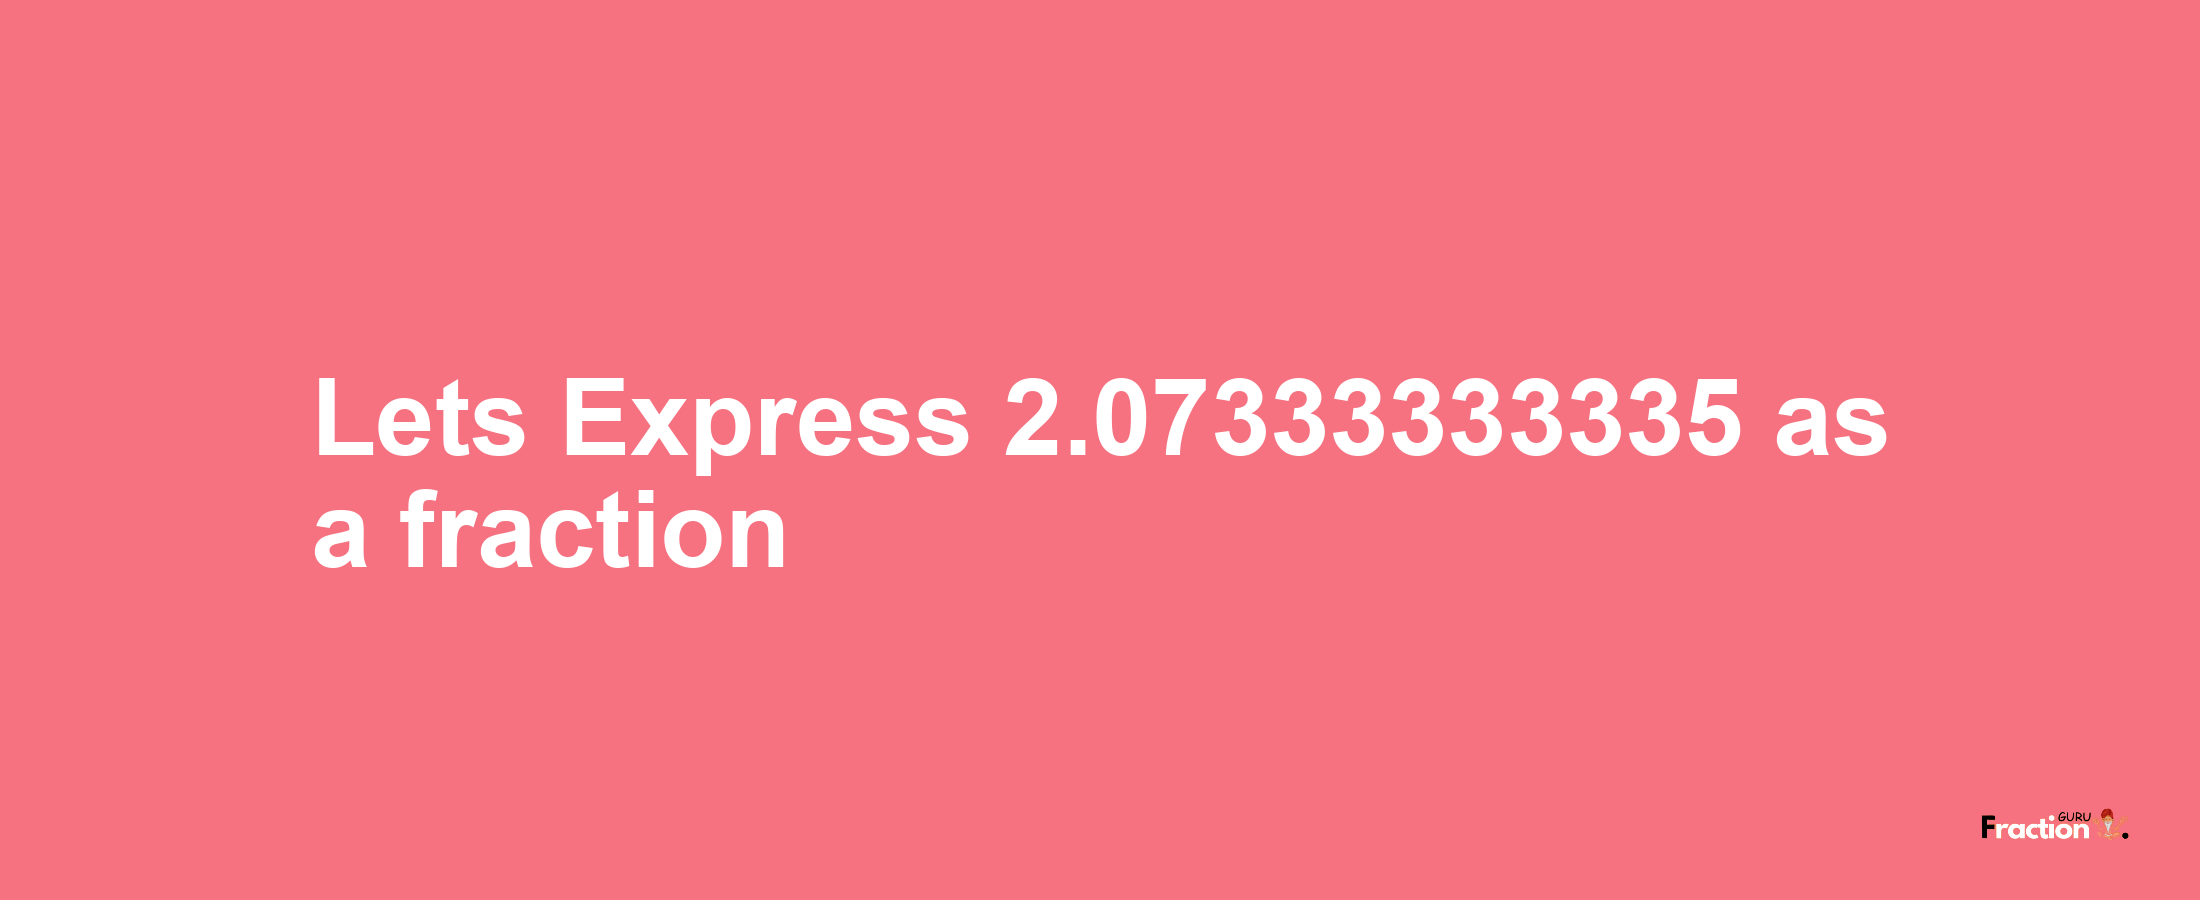 Lets Express 2.07333333335 as afraction